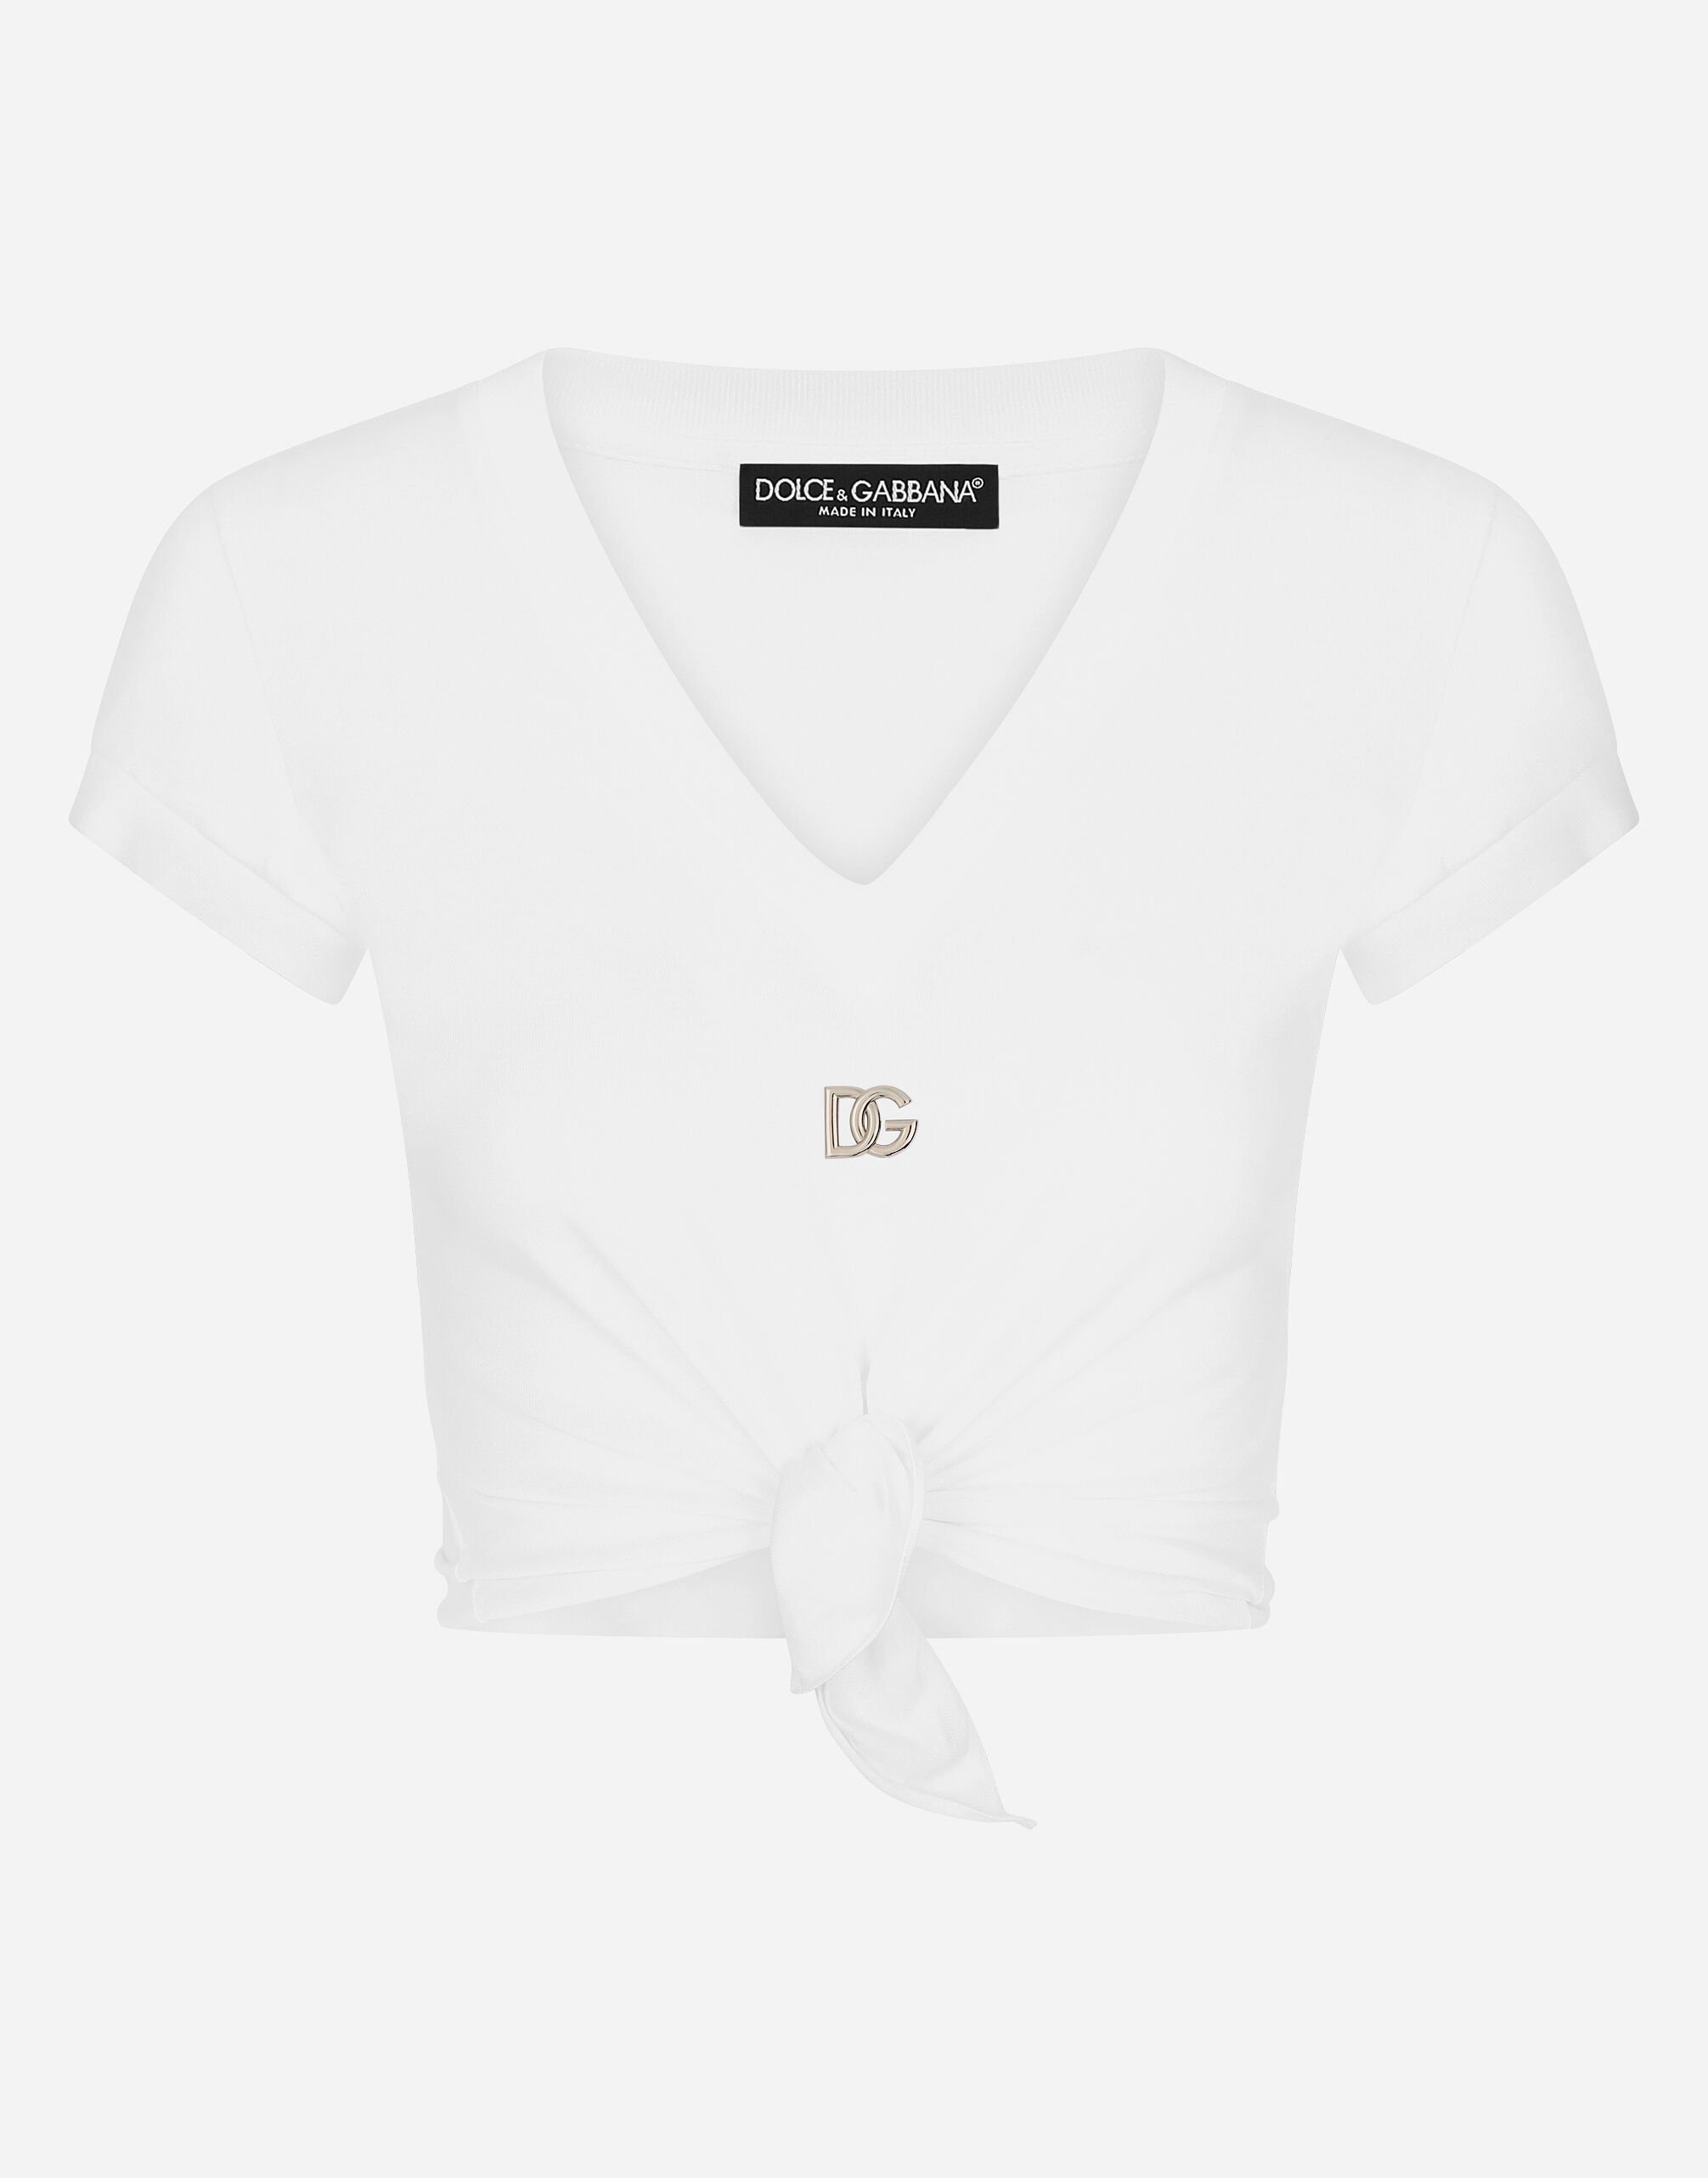 Dolce & Gabbana Jersey T-shirt with DG logo and knot detail Print F6HAATHS5Q2